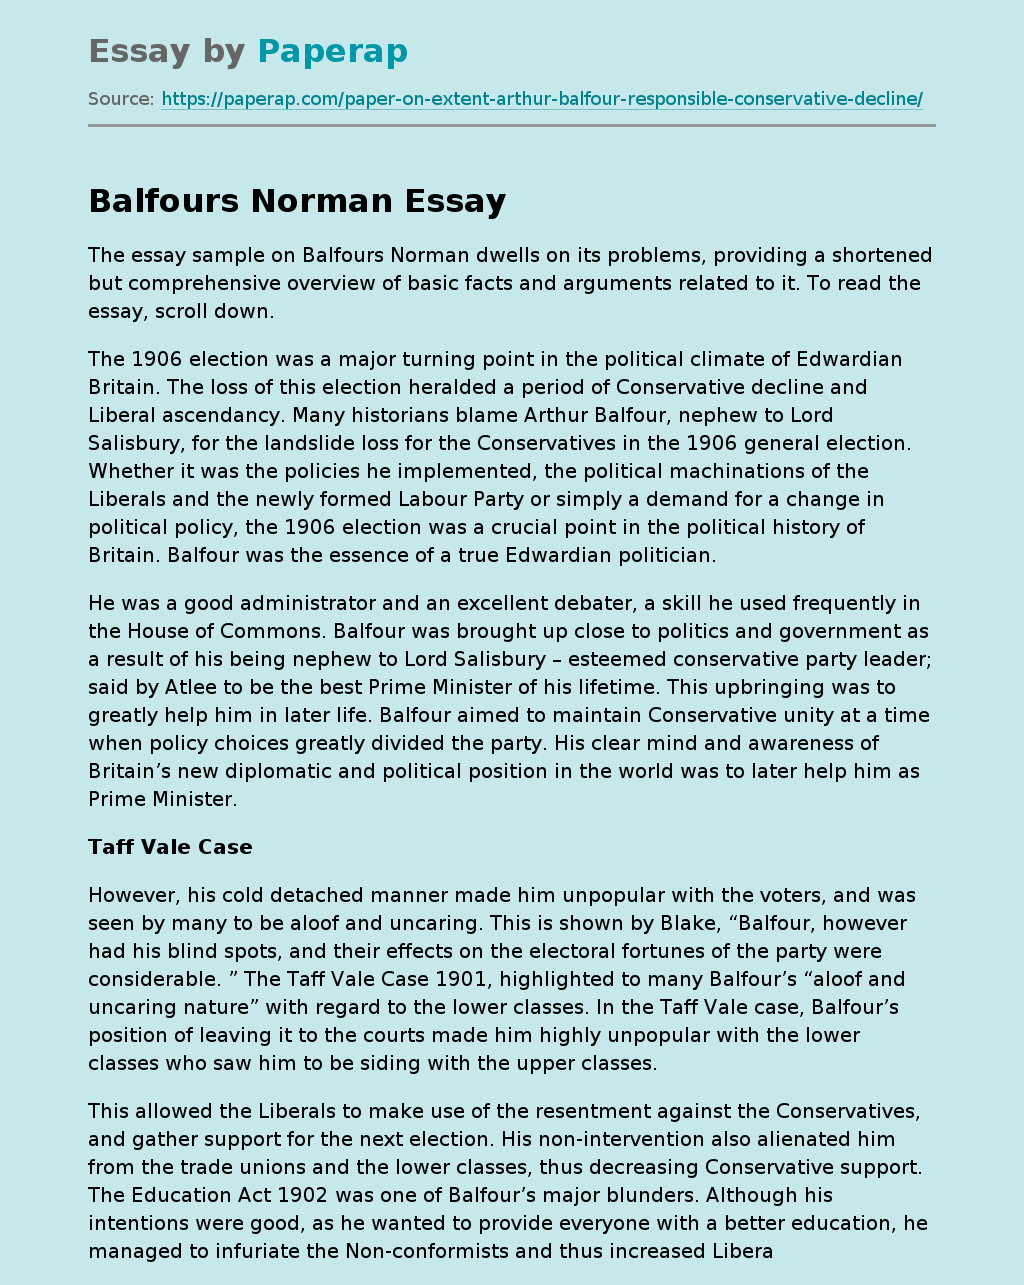 Essay Sample on Balfours Norman